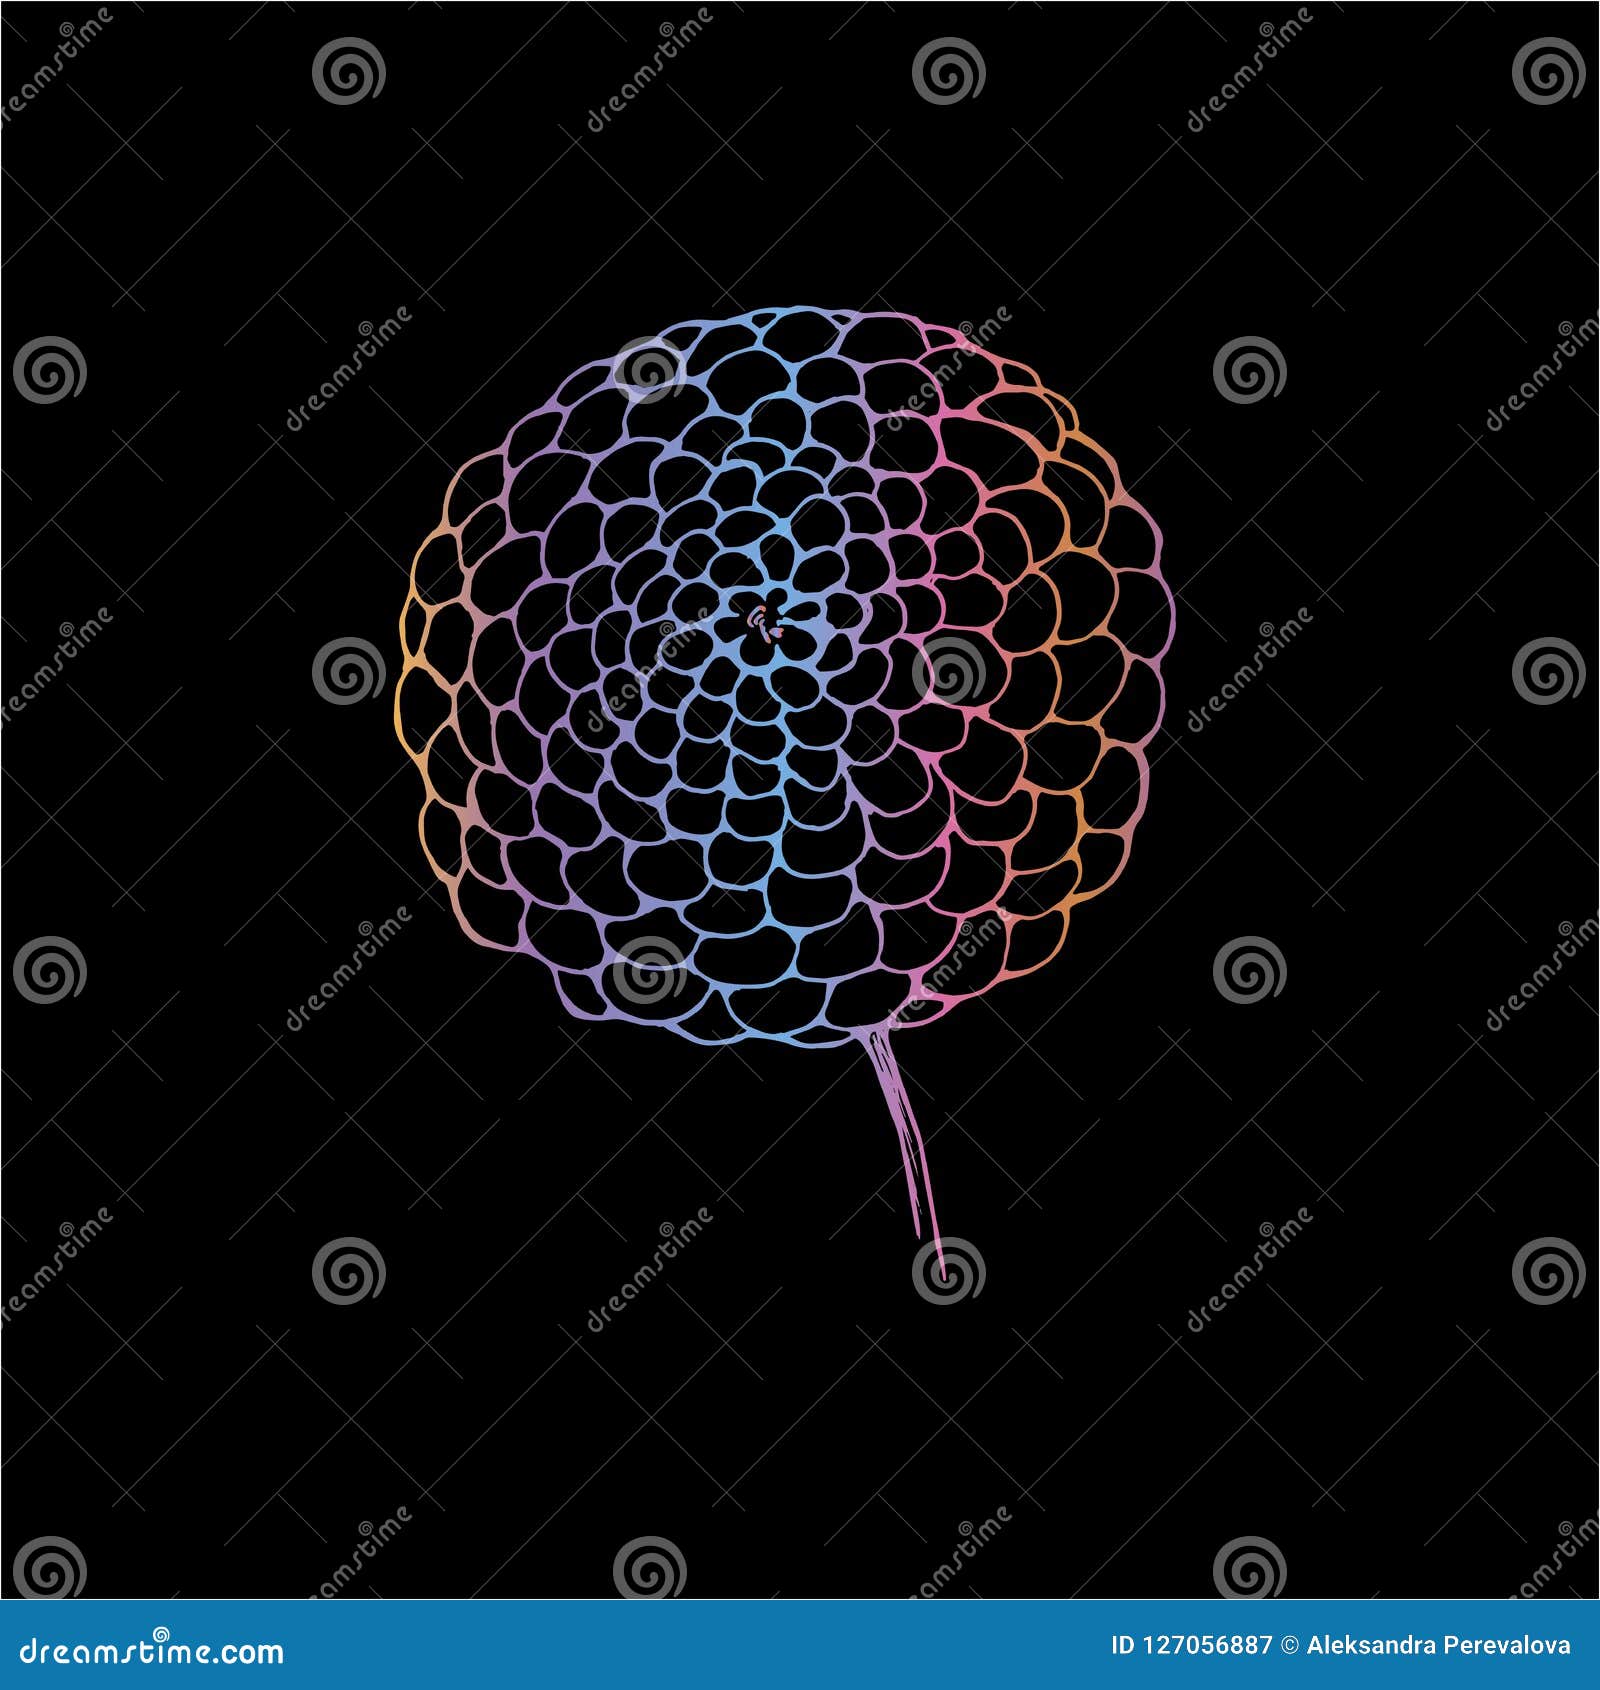 Neon Picture Of A Dahlia Flower The Idea For A Tattoo Stock Vector Illustration Of Natural Beautiful 127056887